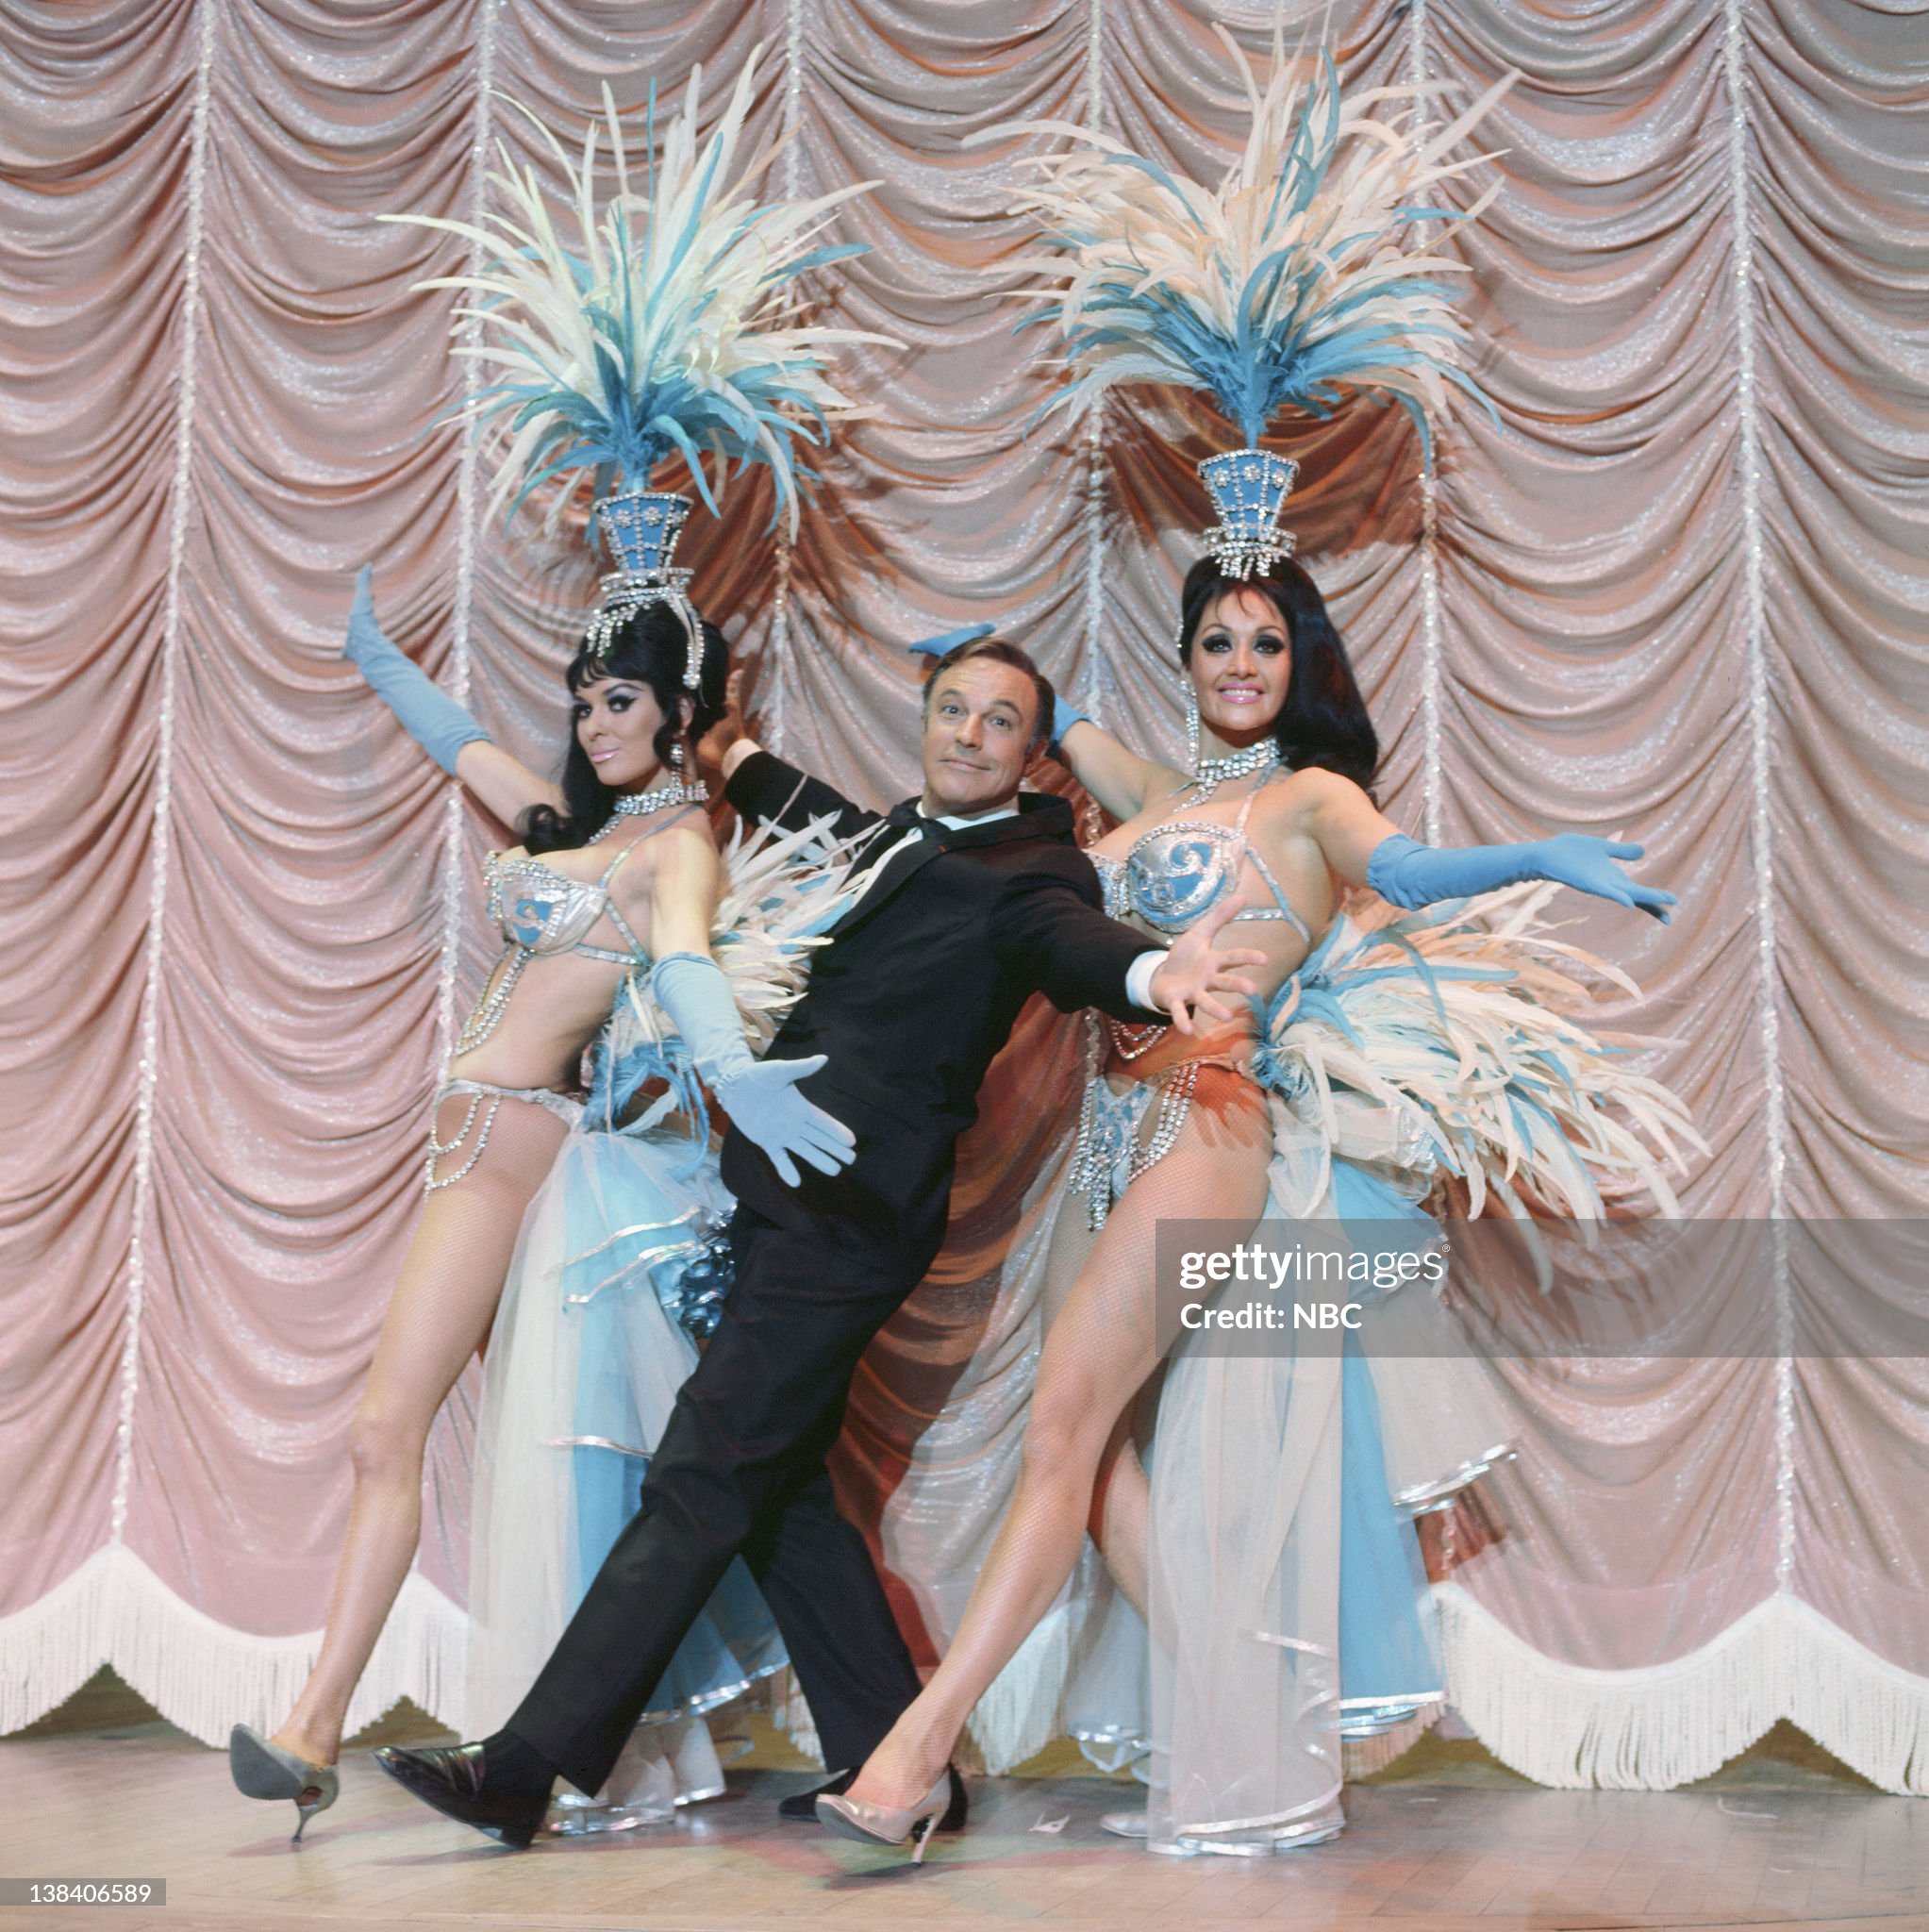 Gene Kelly, center, with the Folies Bergere Showgirls on 14 January 1970. 